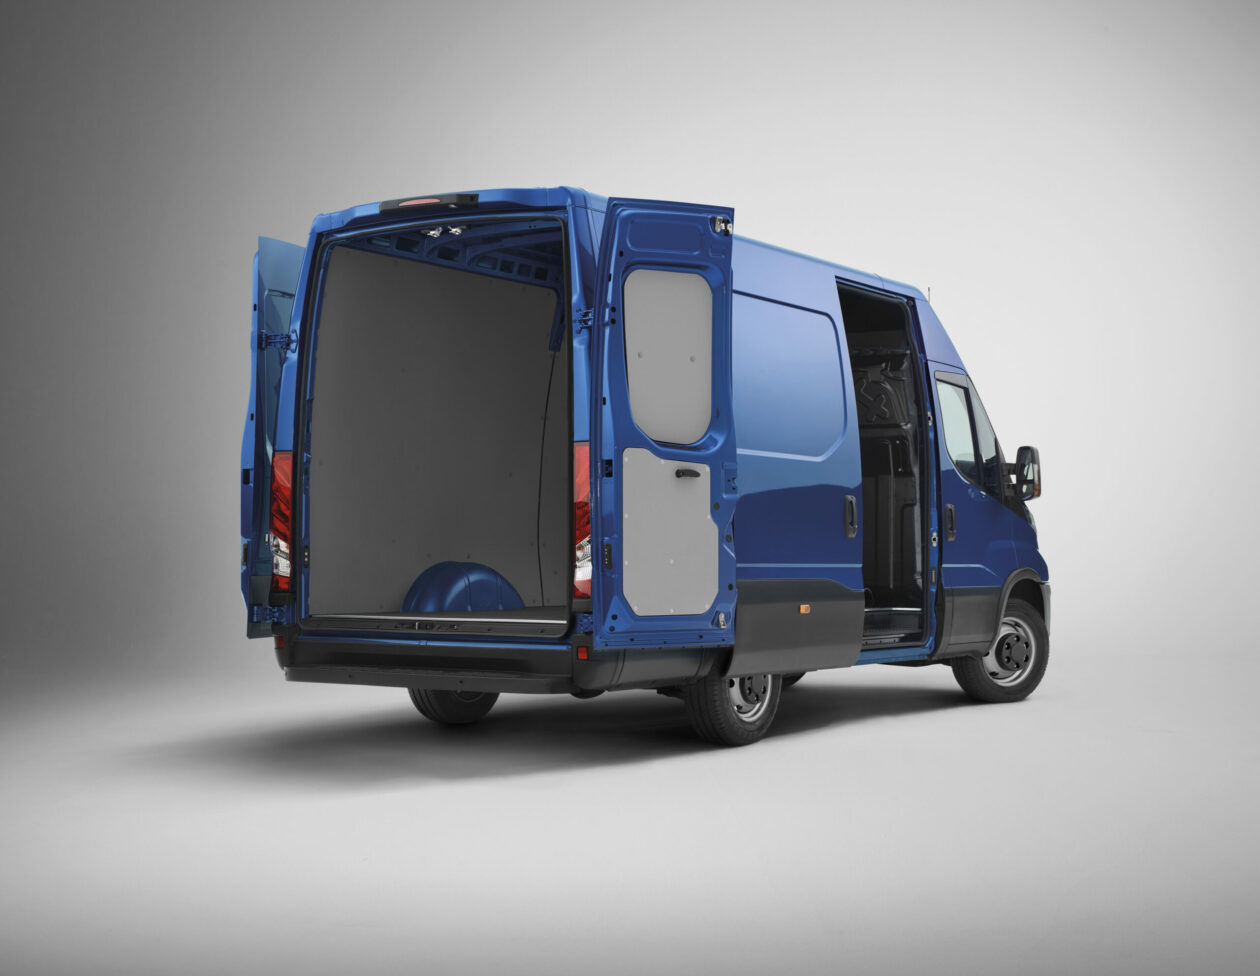 IVECO NEW DAILY VAN 04 scaled 1